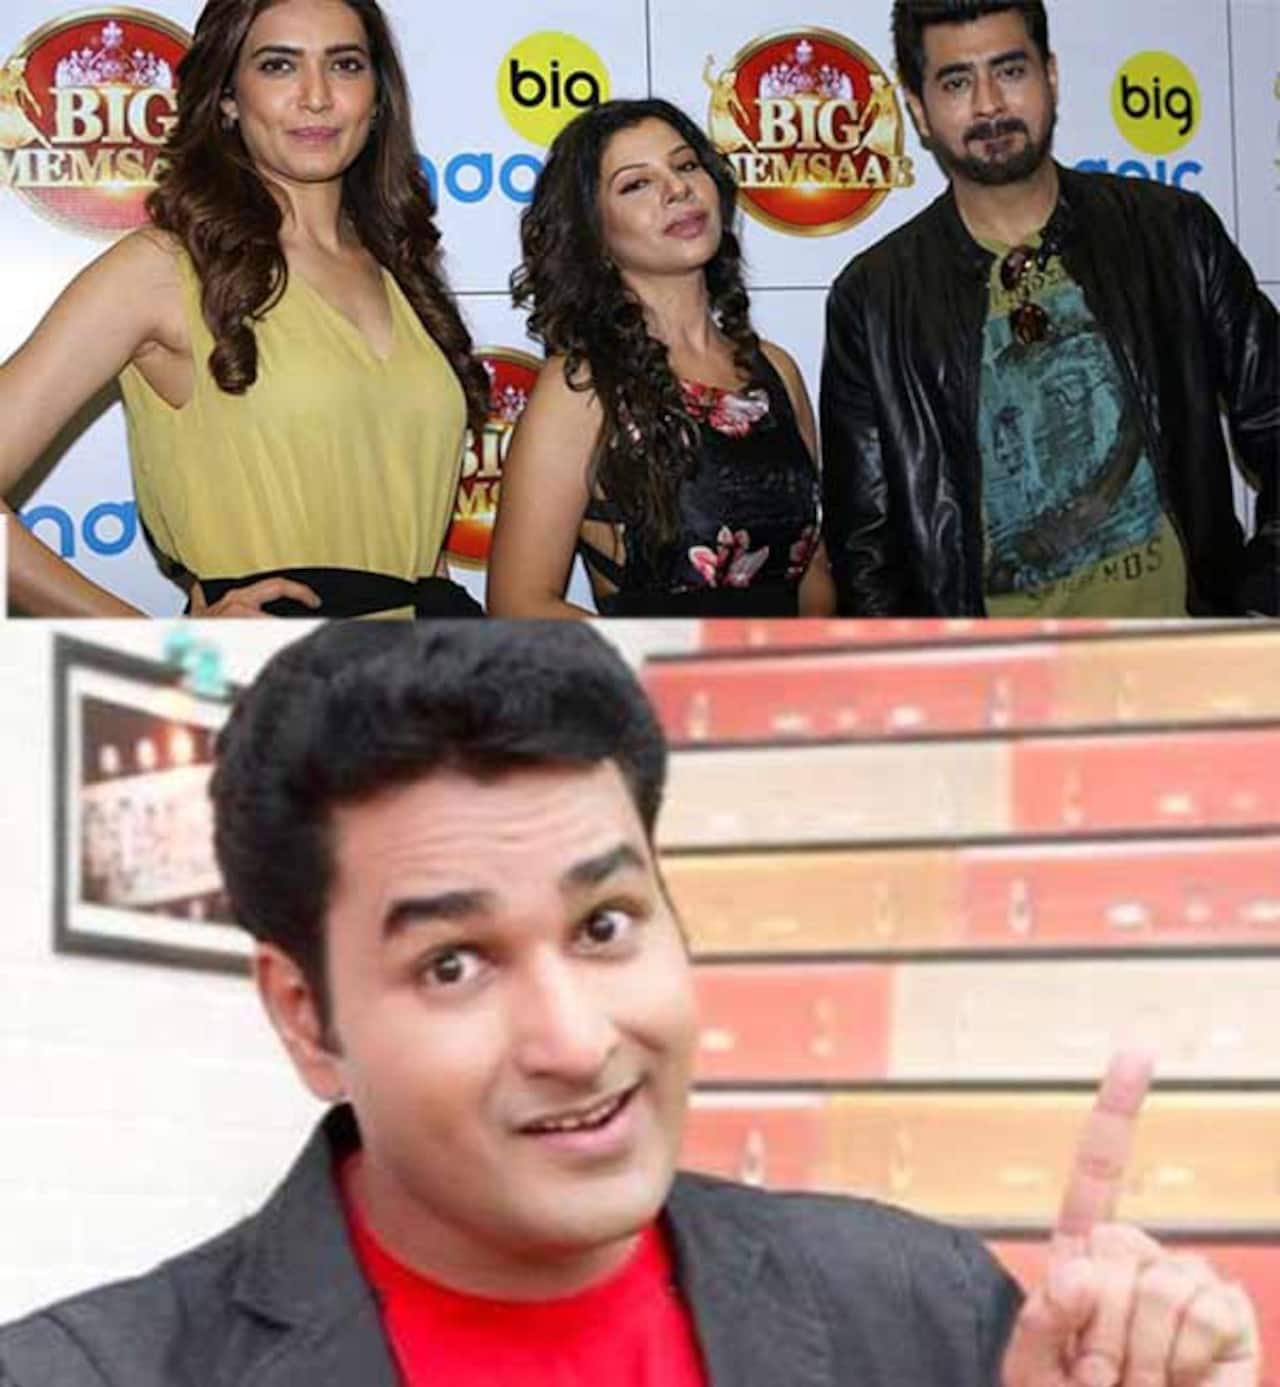 Mubeen Saudagar joins the cast of Big Memsaab for Valentine's Day special episode